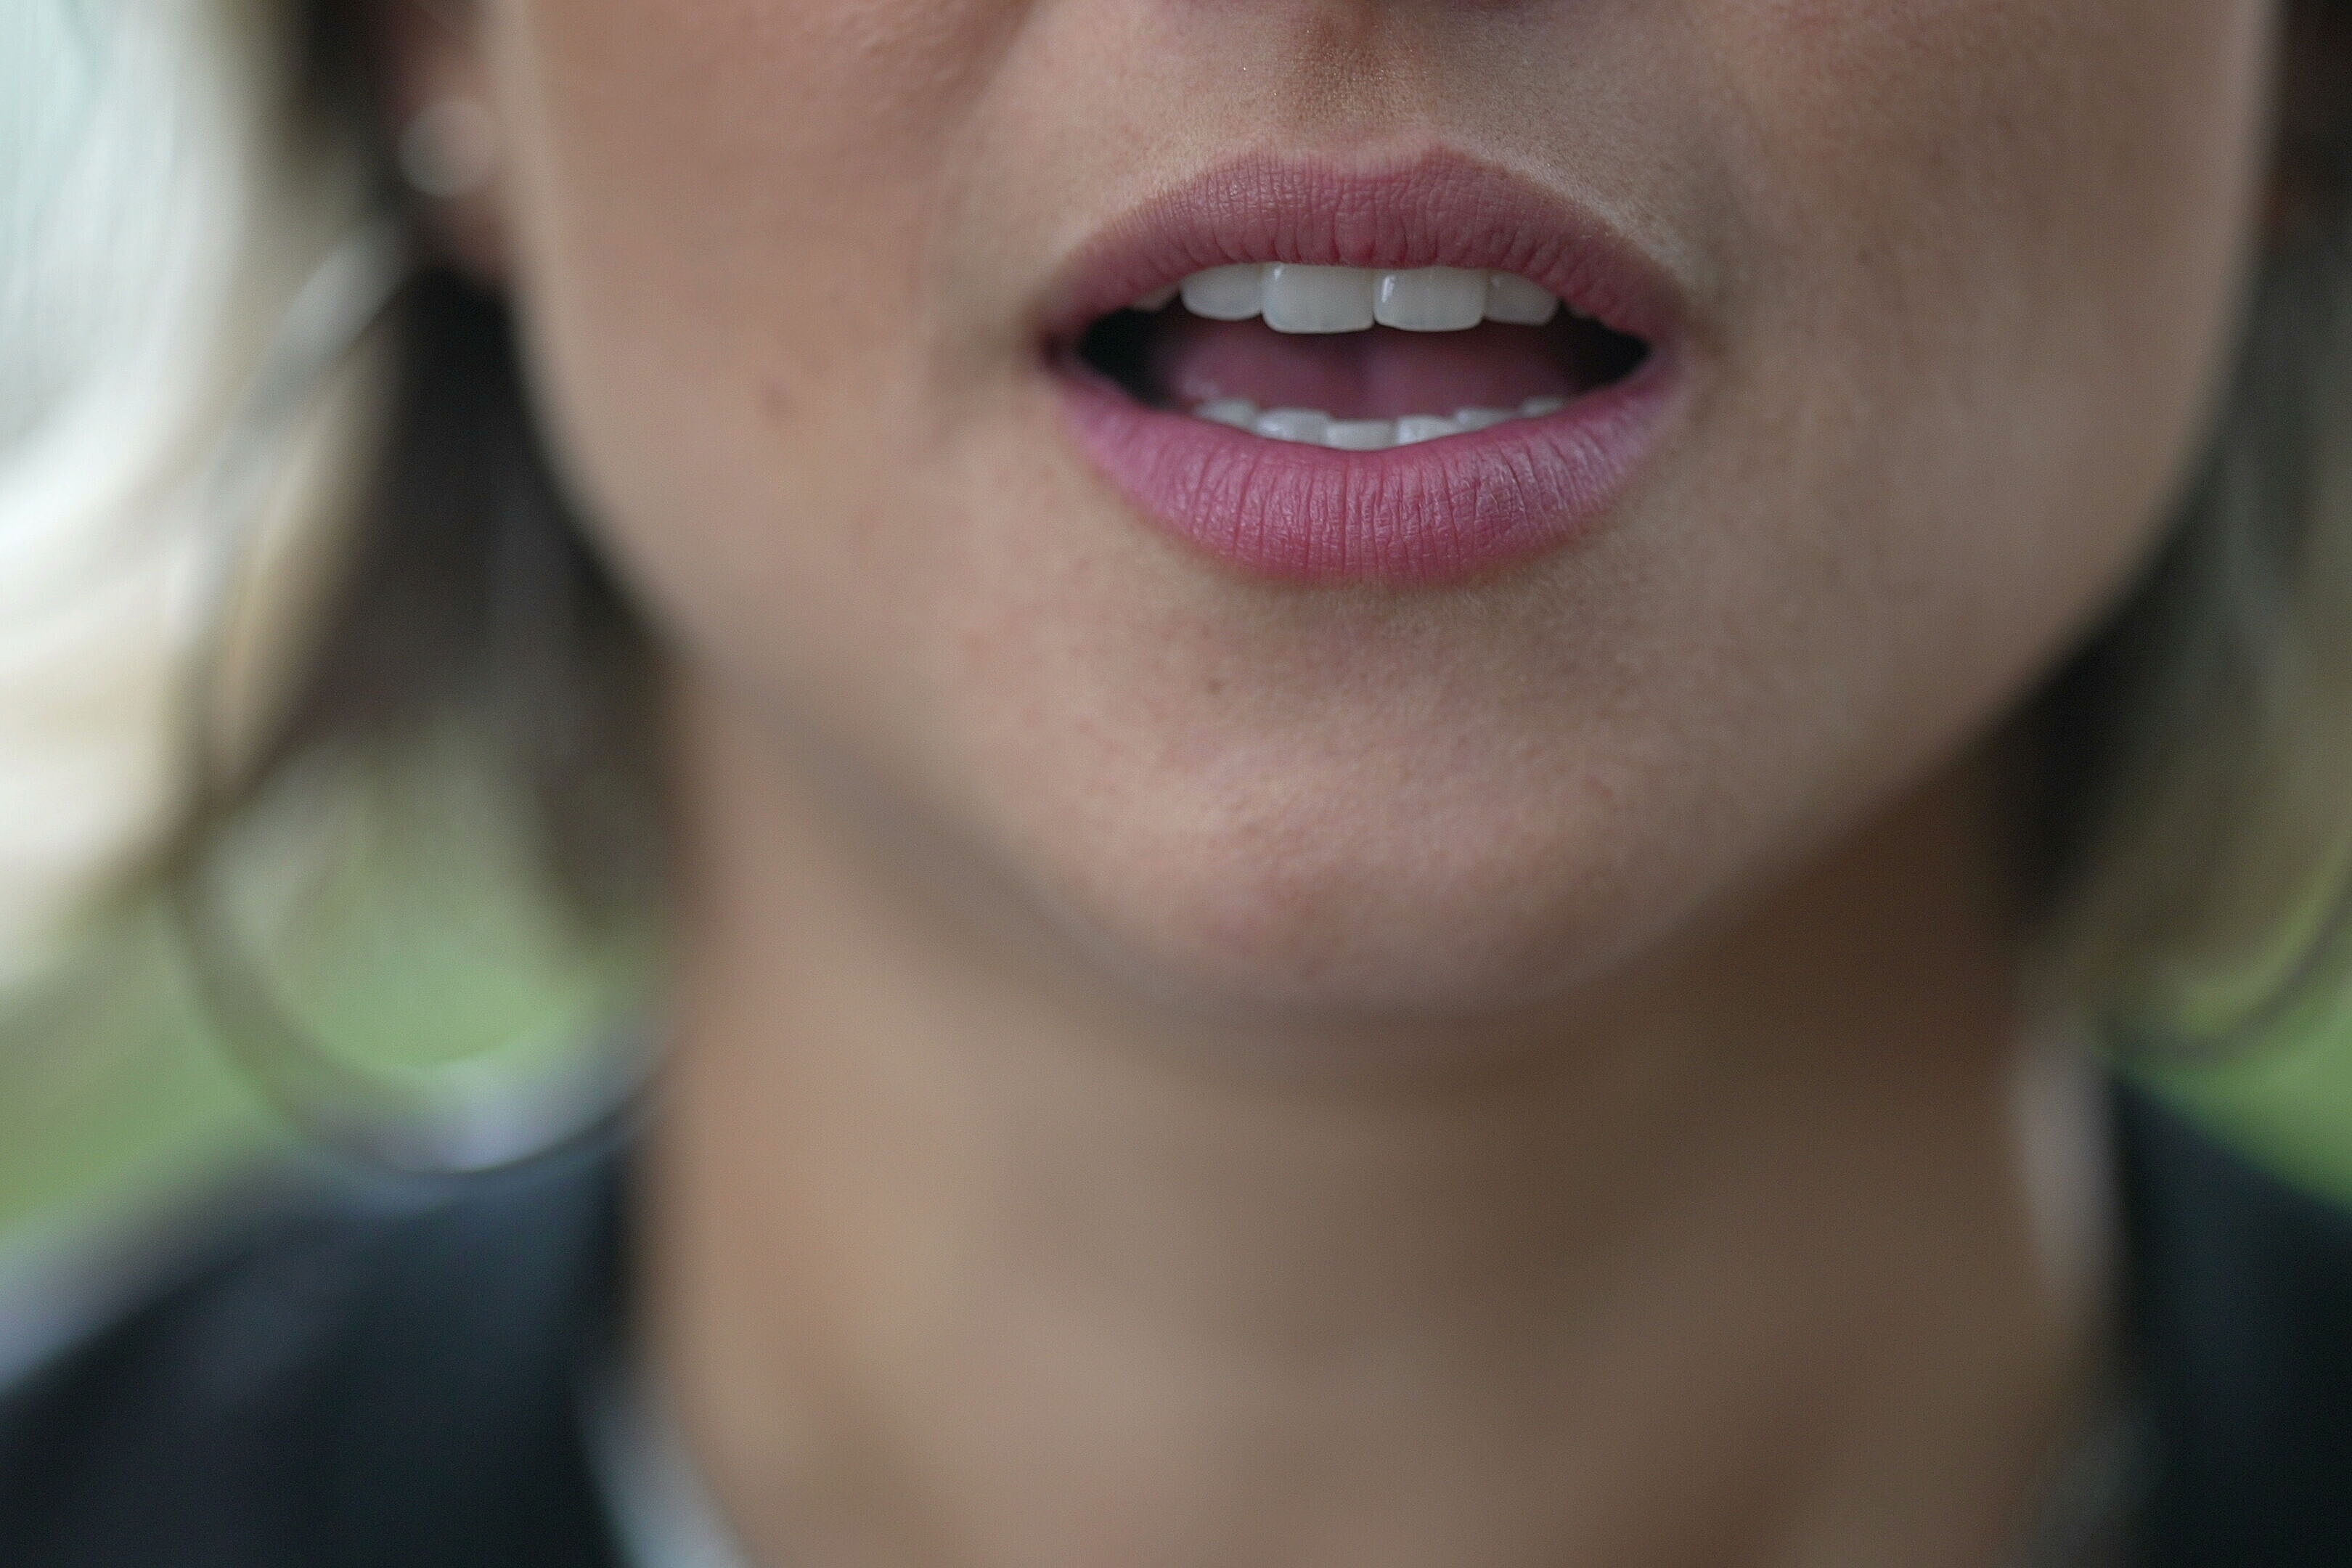 Image shows detail of mouth of talking woman